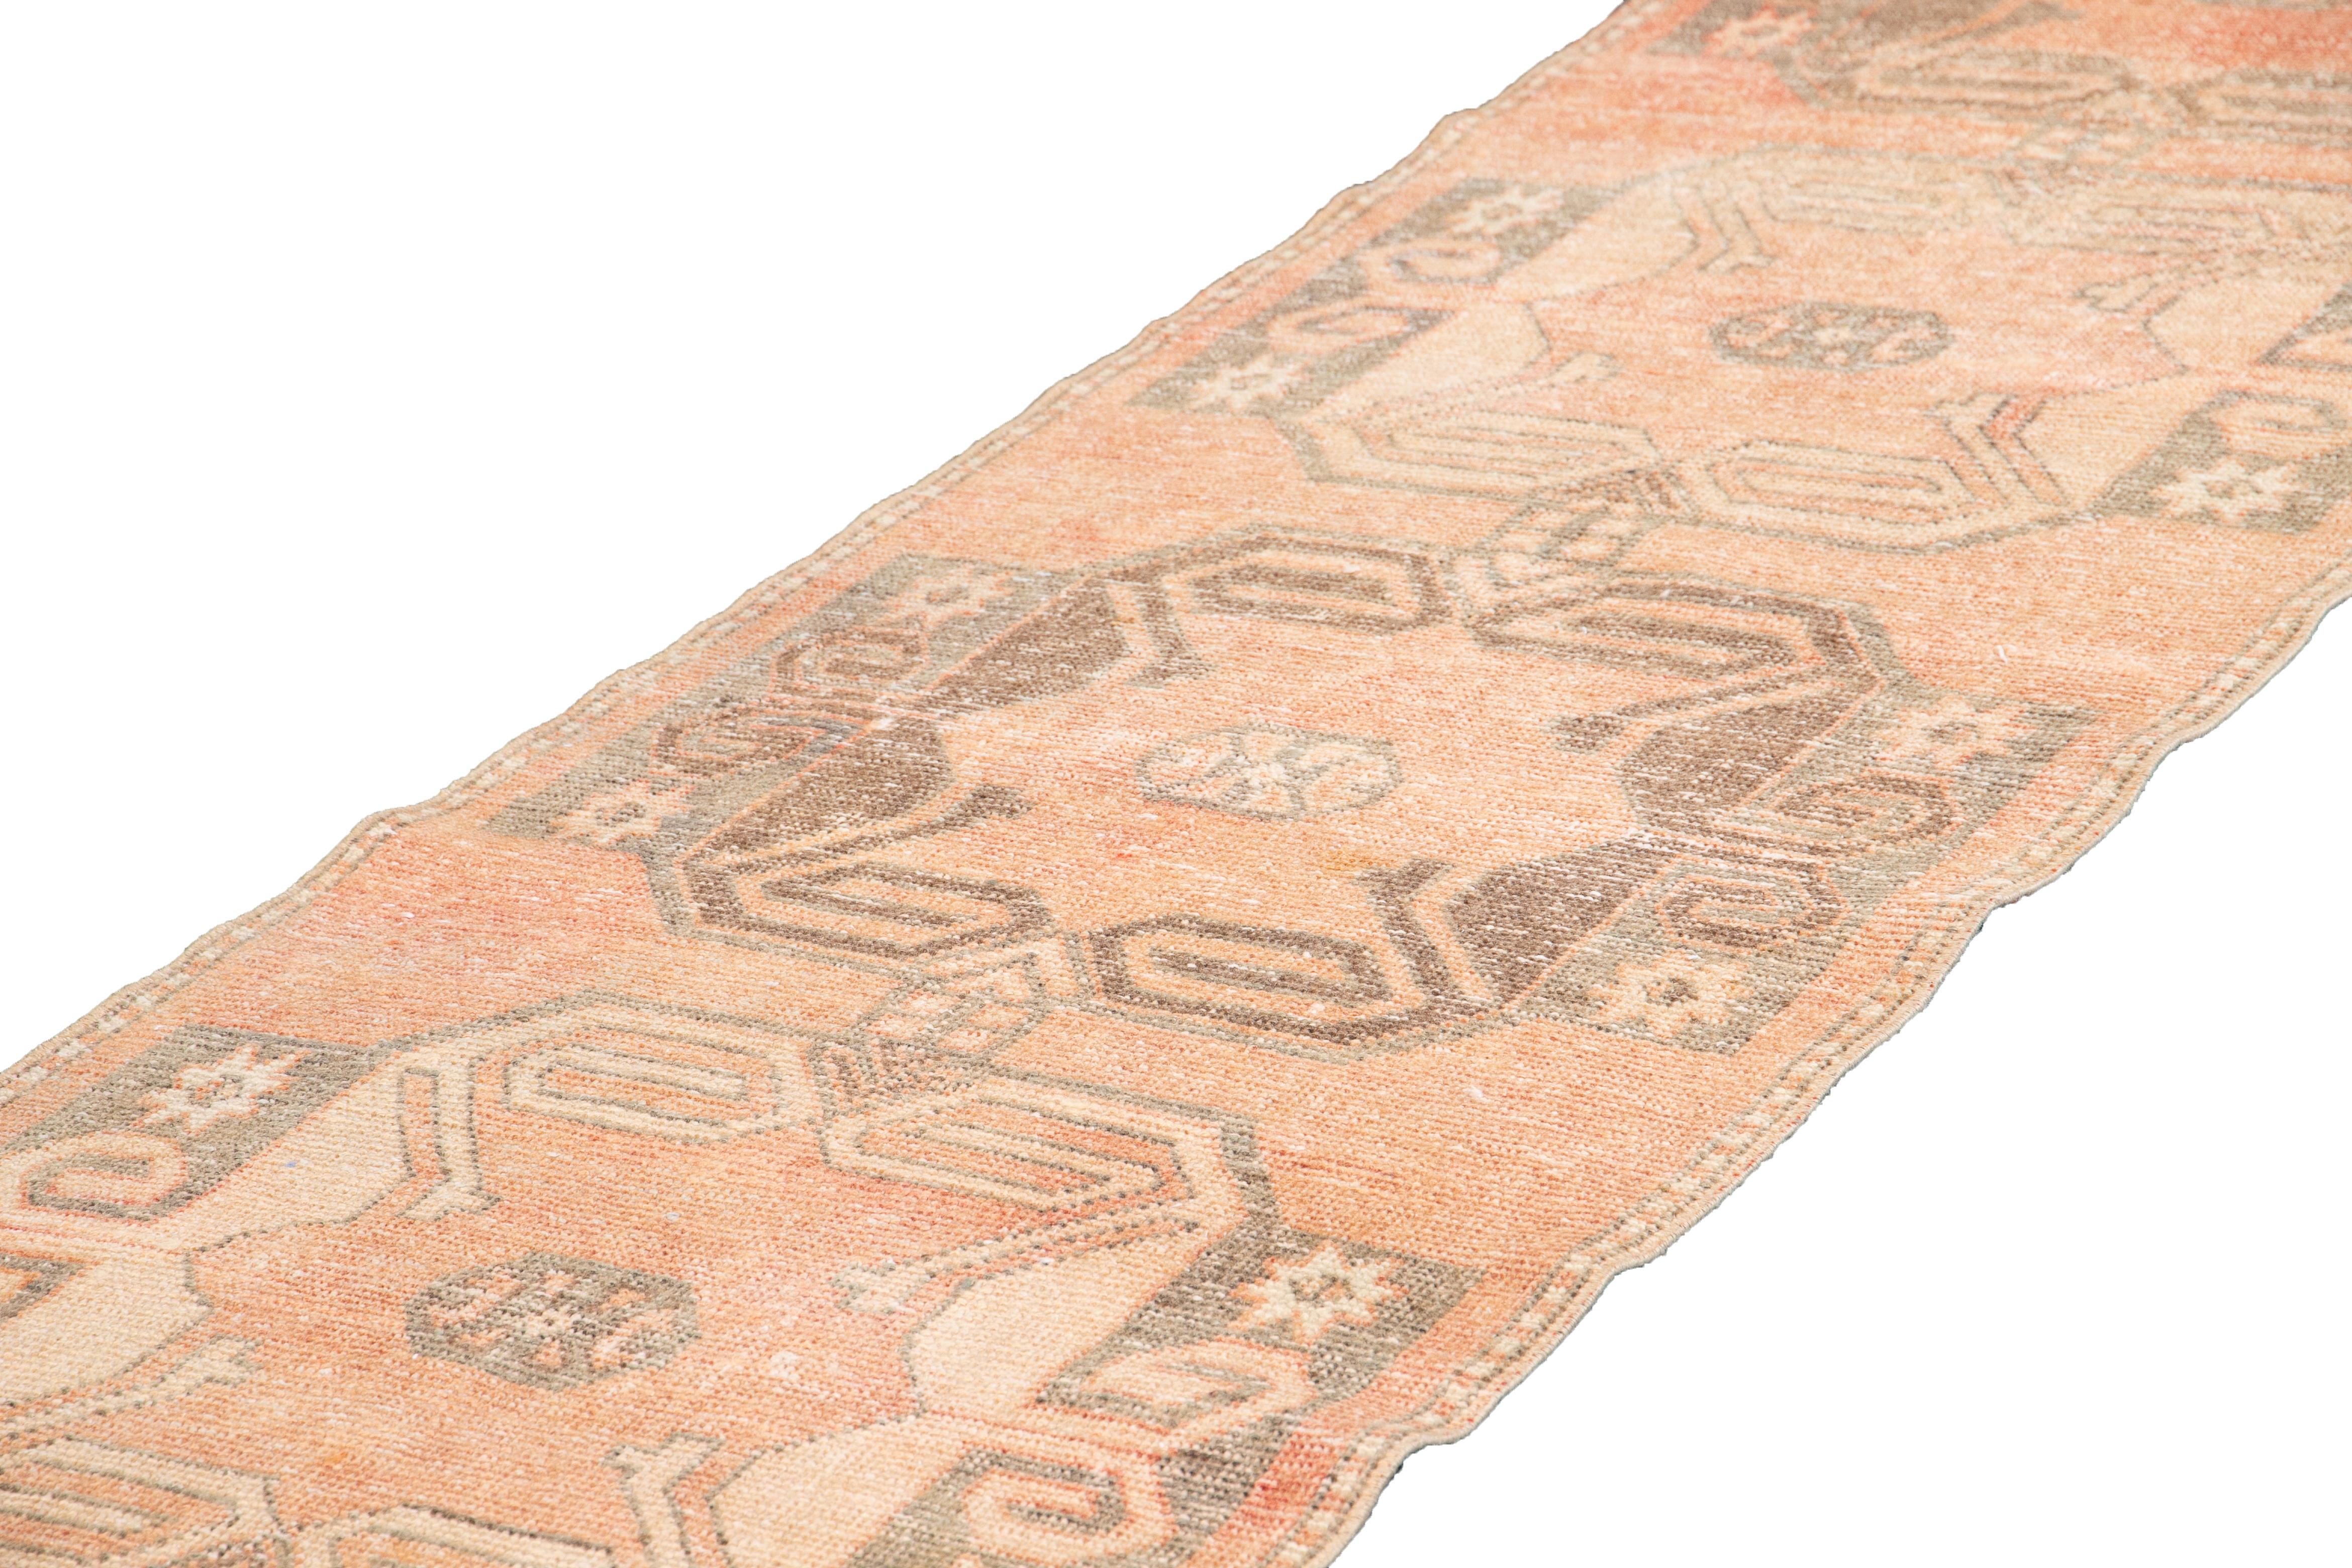 Beautiful Vintage Runner Rug, hand-knotted wool with a peach field, tan accents in a multi medallion design.
This rug measures 2' 11